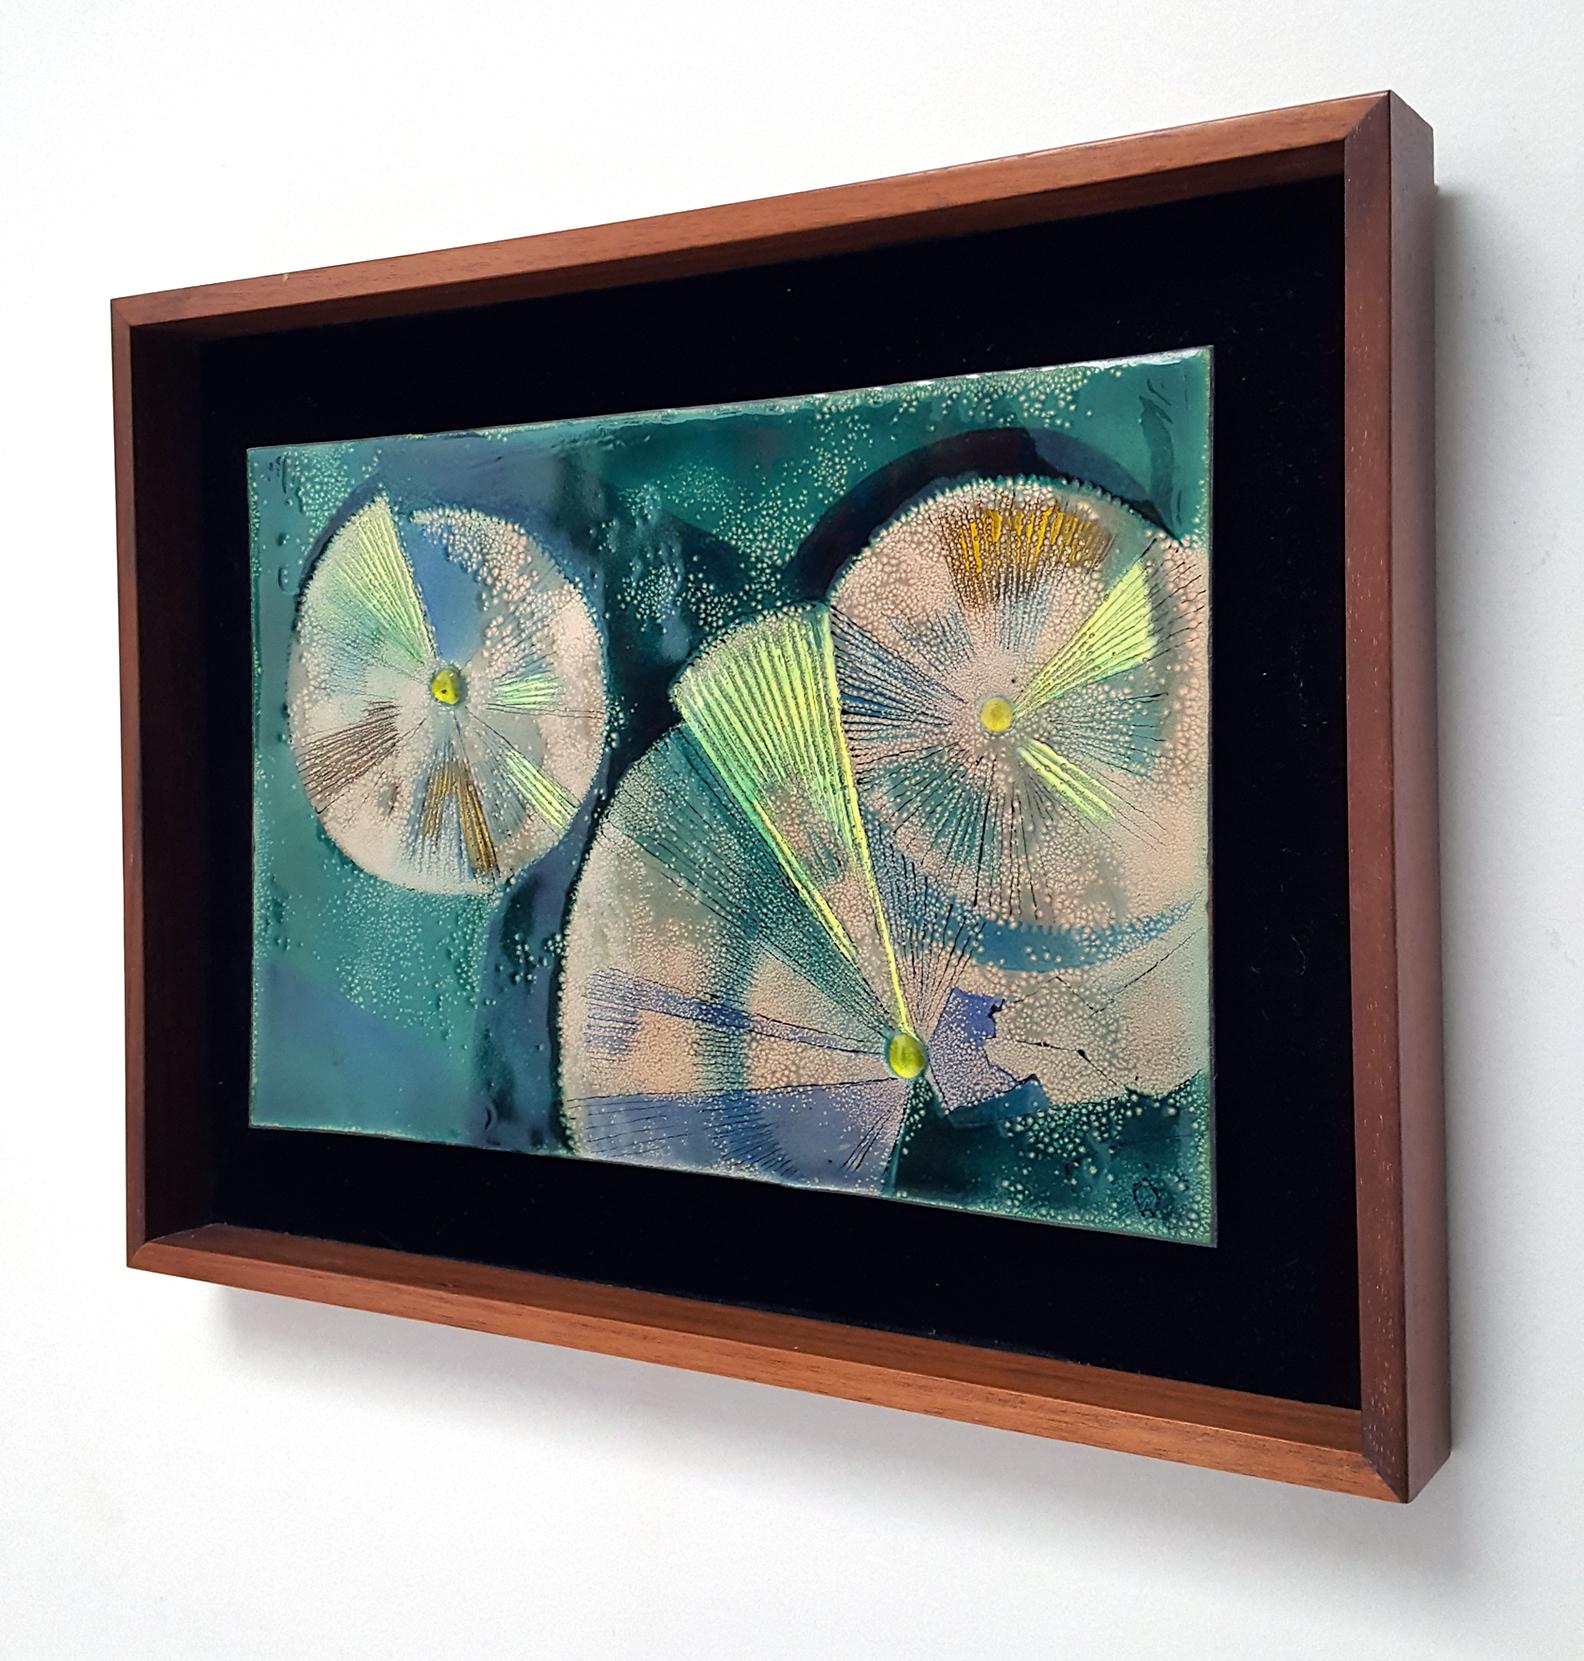 'Abstraction 1' Enamel on copper plate by Irwin Whitaker, Walnut frame , 1960s
Oklahoma-born artist who was prolific in California, Taos and Austin. We have a number of his works available.